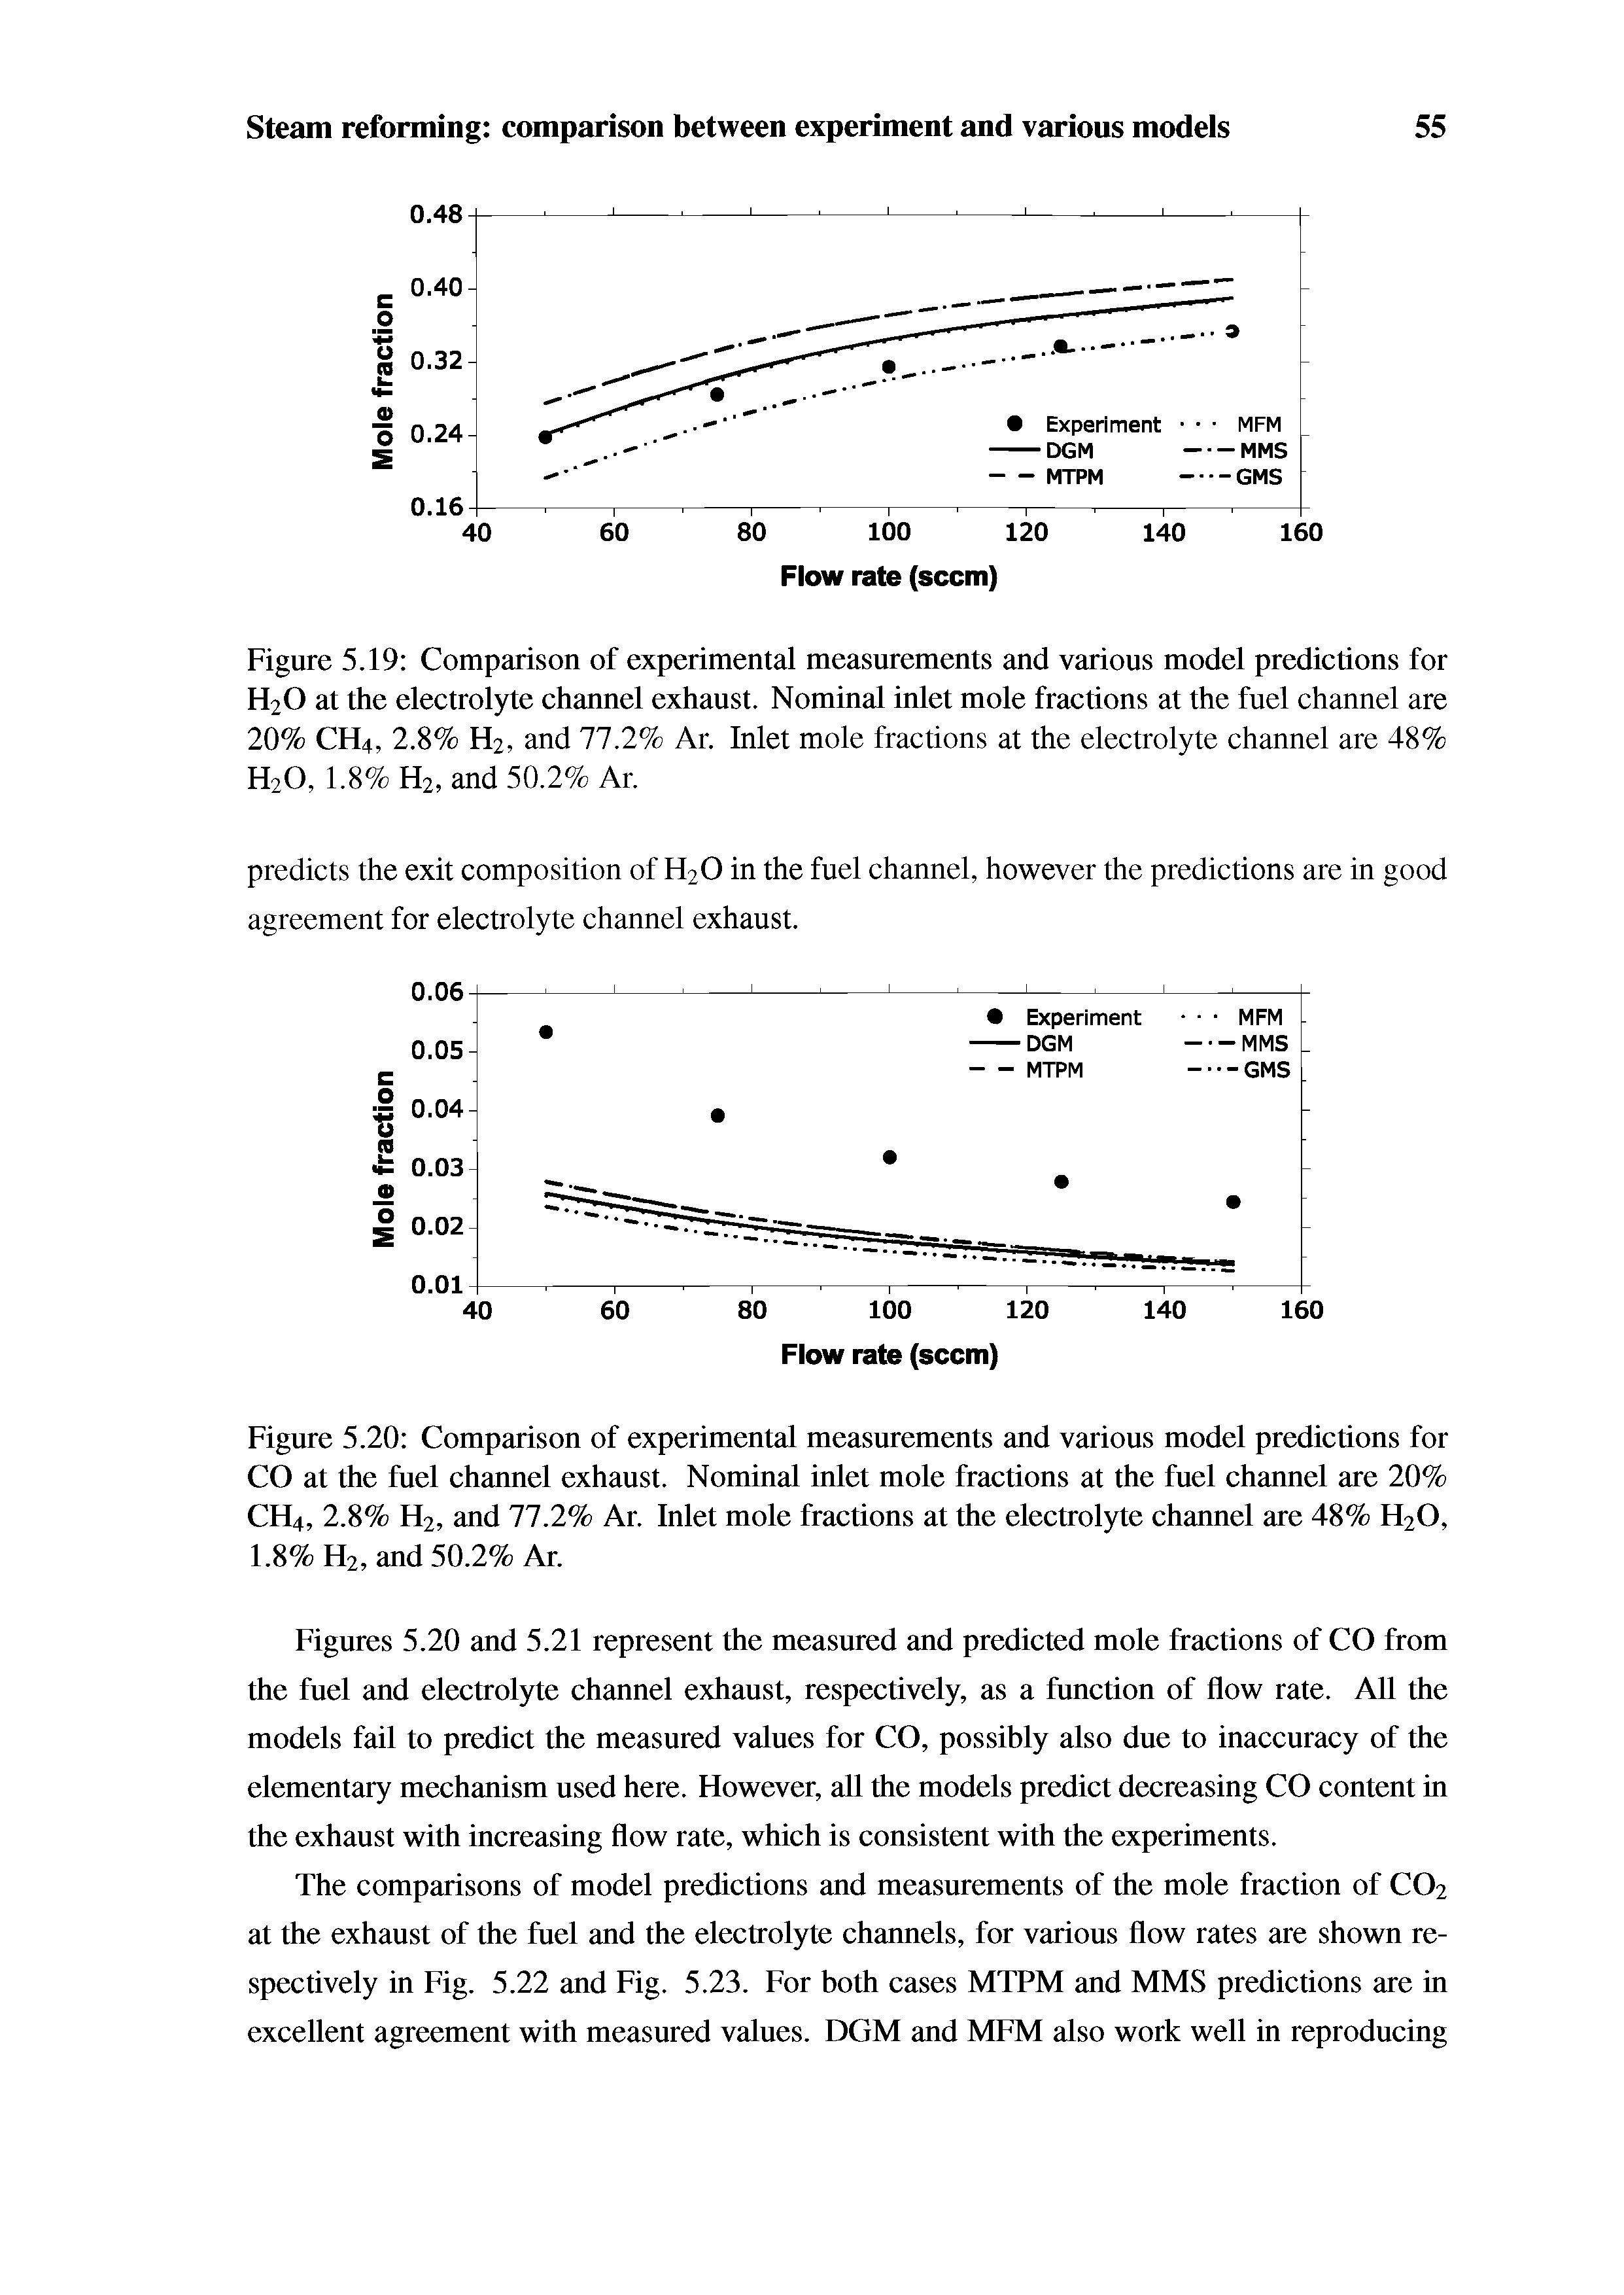 Figures 5.20 and 5.21 represent the measured and predicted mole fractions of CO from the fuel and electrolyte channel exhaust, respectively, as a function of flow rate. All the models fail to predict the measured values for CO, possibly also due to inaccuracy of the elementary mechanism used here. However, all the models predict decreasing CO content in the exhaust with increasing flow rate, which is consistent with the experiments.